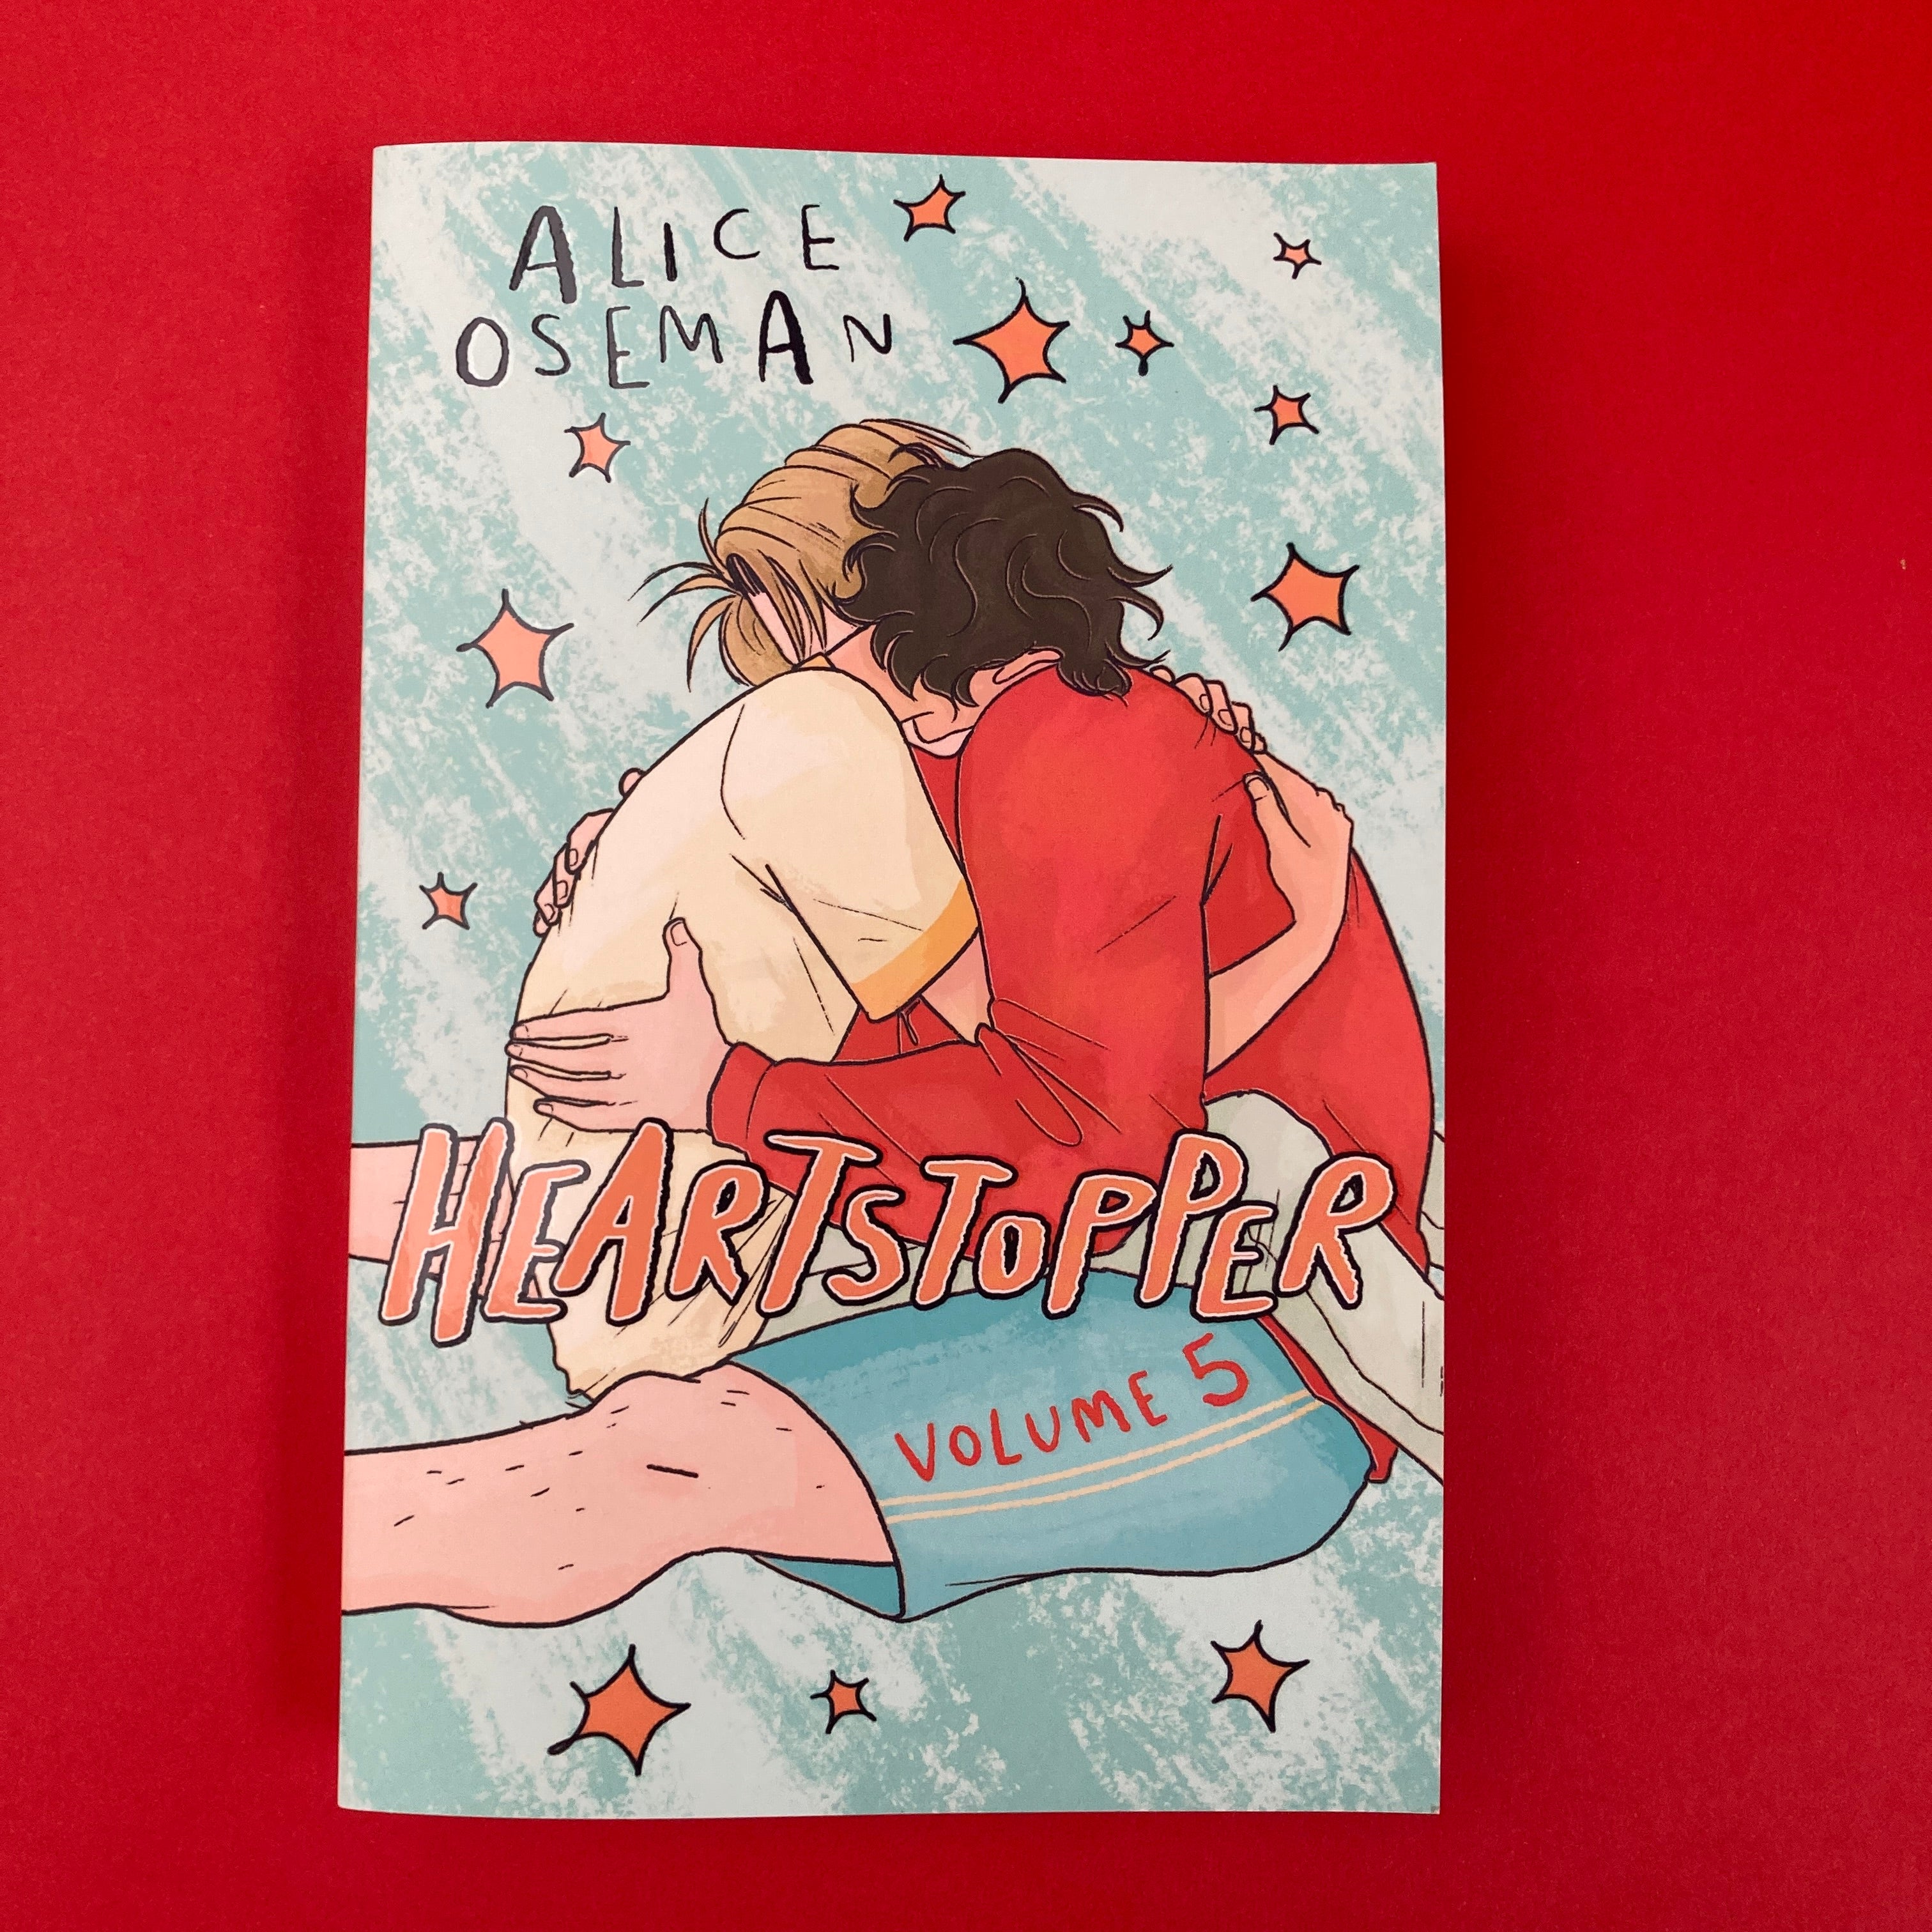 Heartstopper #5 by Alice Oseman – The Nose